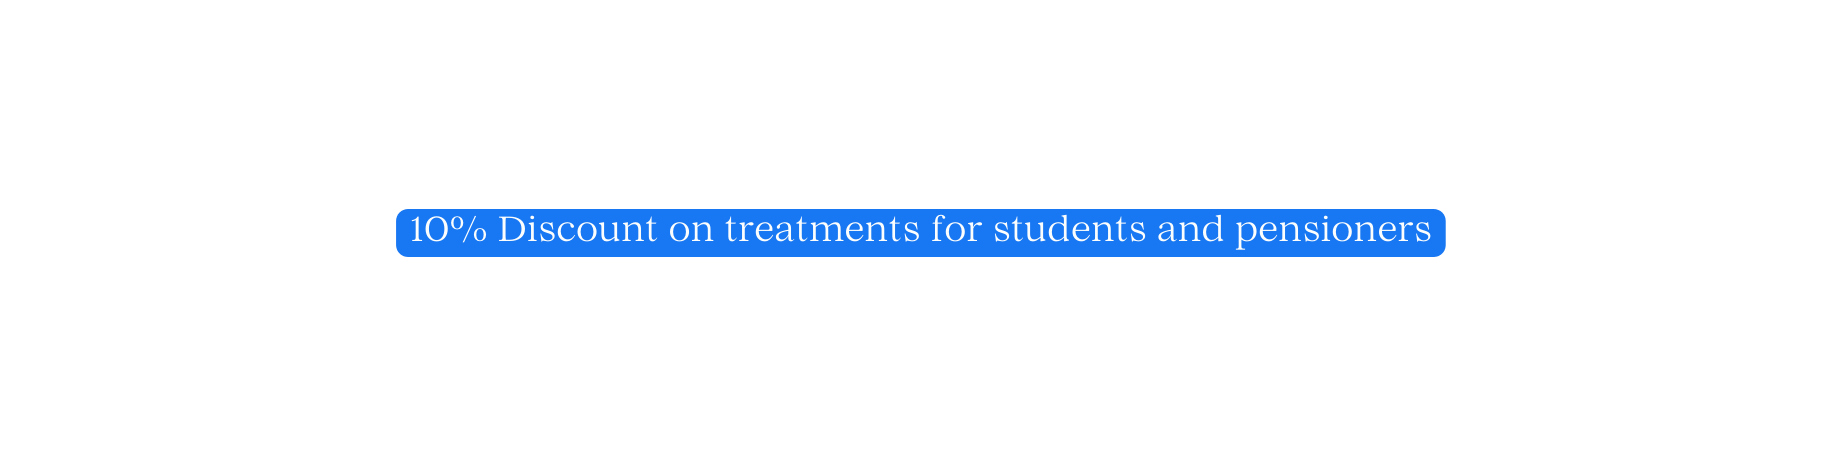 10 Discount on treatments for students and pensioners